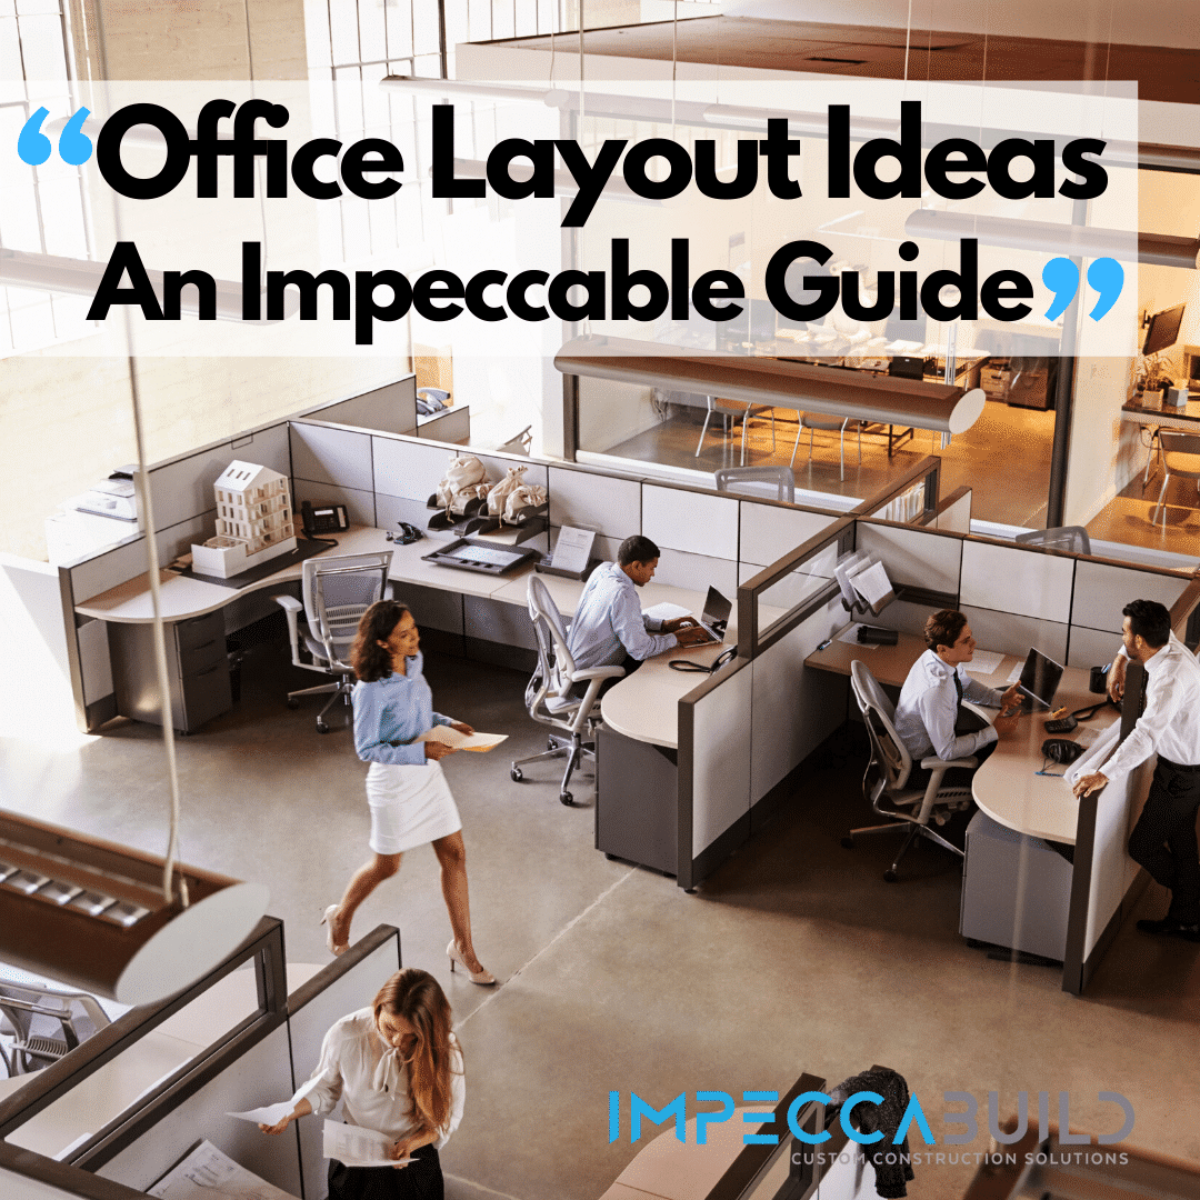 Office Layout Ideas | An Impeccable Guide 2020 | FREE